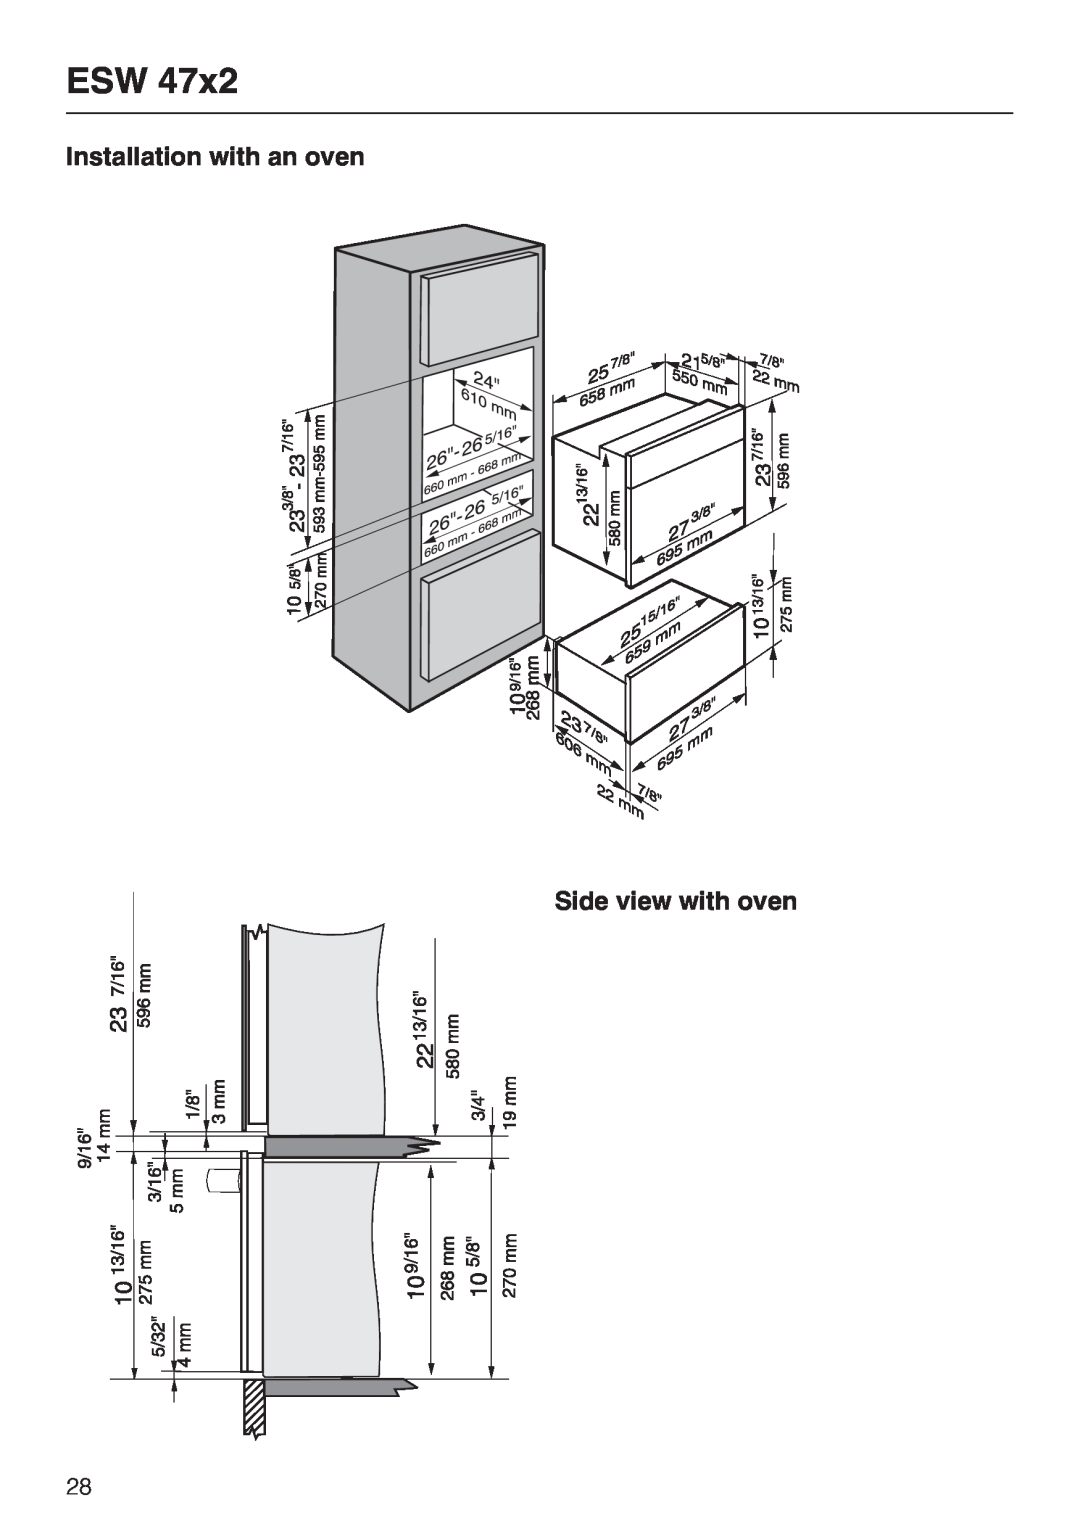 Miele ESW 48X2, ESW4082-14, ESW 47X2, ESW 4088-14 installation instructions Installation with an oven Side view with oven 